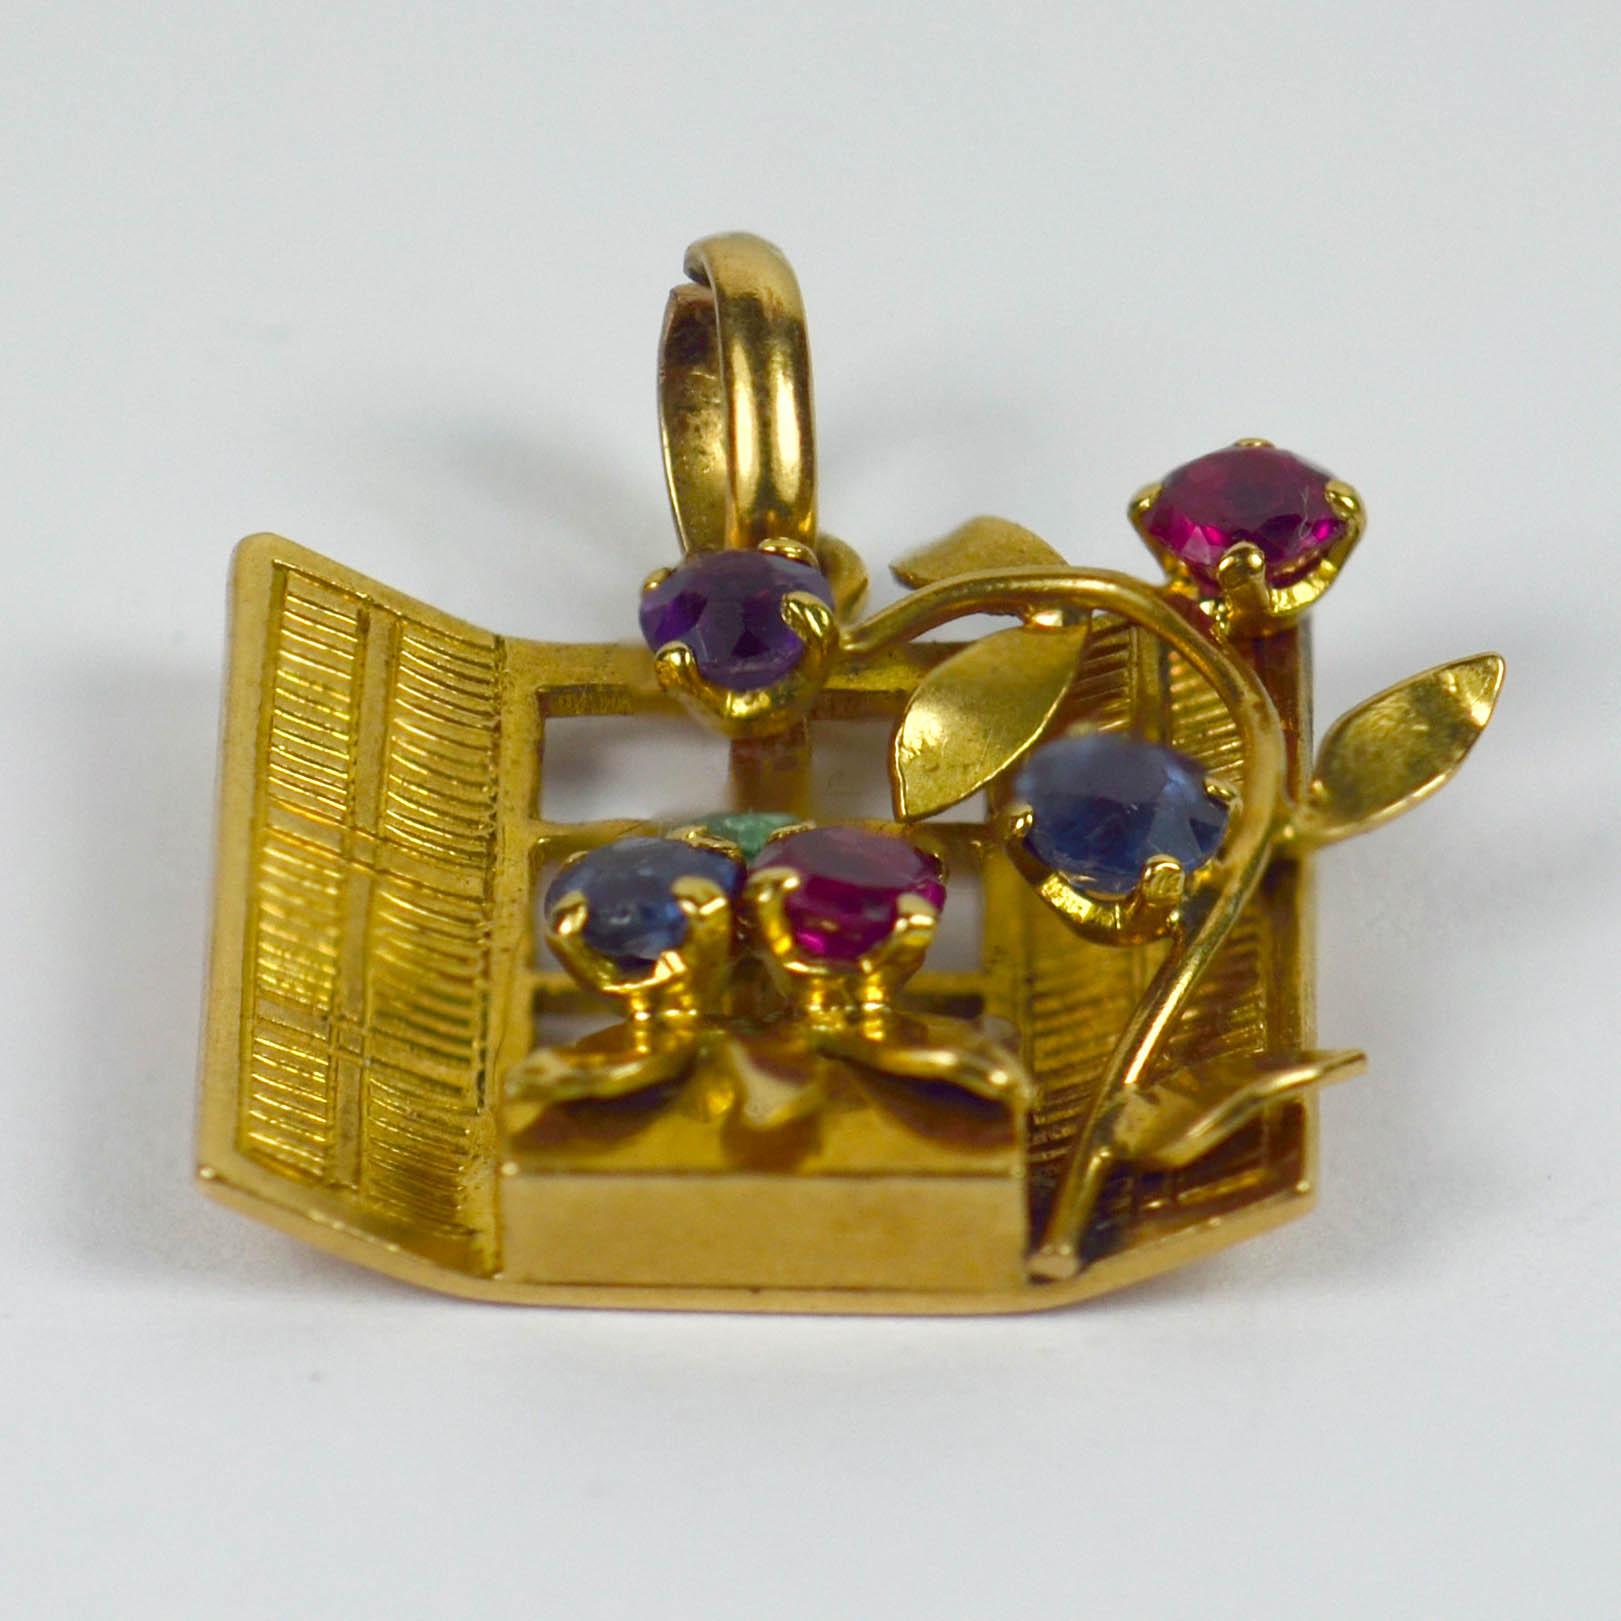 A French 18 karat yellow gold charm pendant designed as an open window with gem set flowering vine and flower box. Stamped with the eagles head for French manufacture and 18 karat gold, and set with red, purple, green and blue round cut